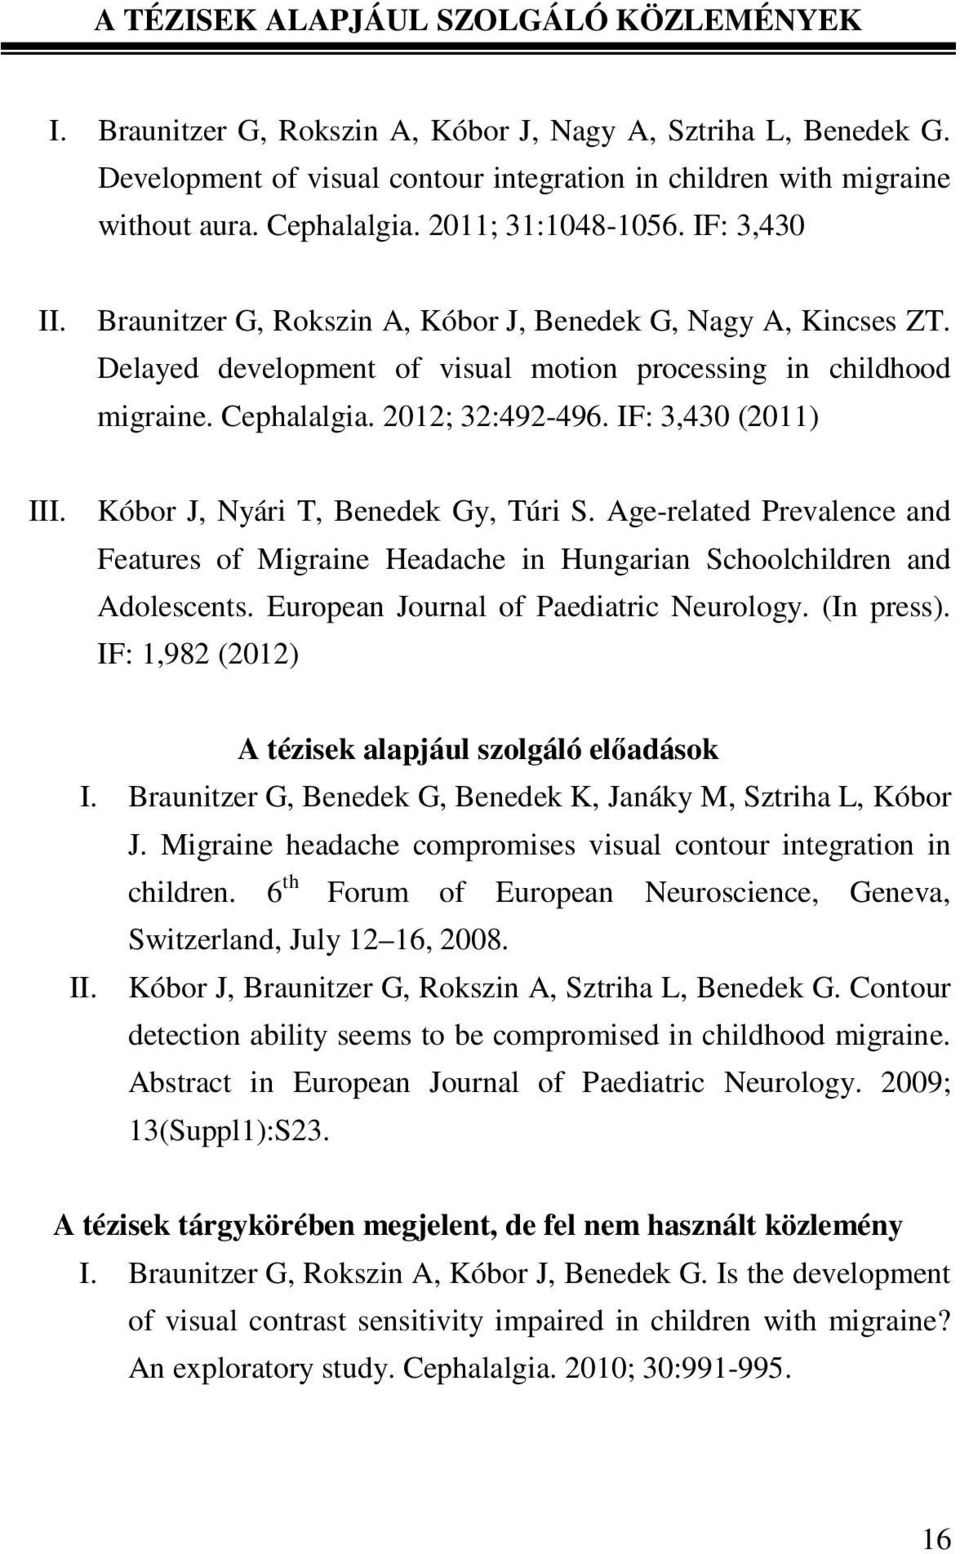 2012; 32:492-496. IF: 3,430 (2011) III. Kóbor J, Nyári T, Benedek Gy, Túri S. Age-related Prevalence and Features of Migraine Headache in Hungarian Schoolchildren and Adolescents.